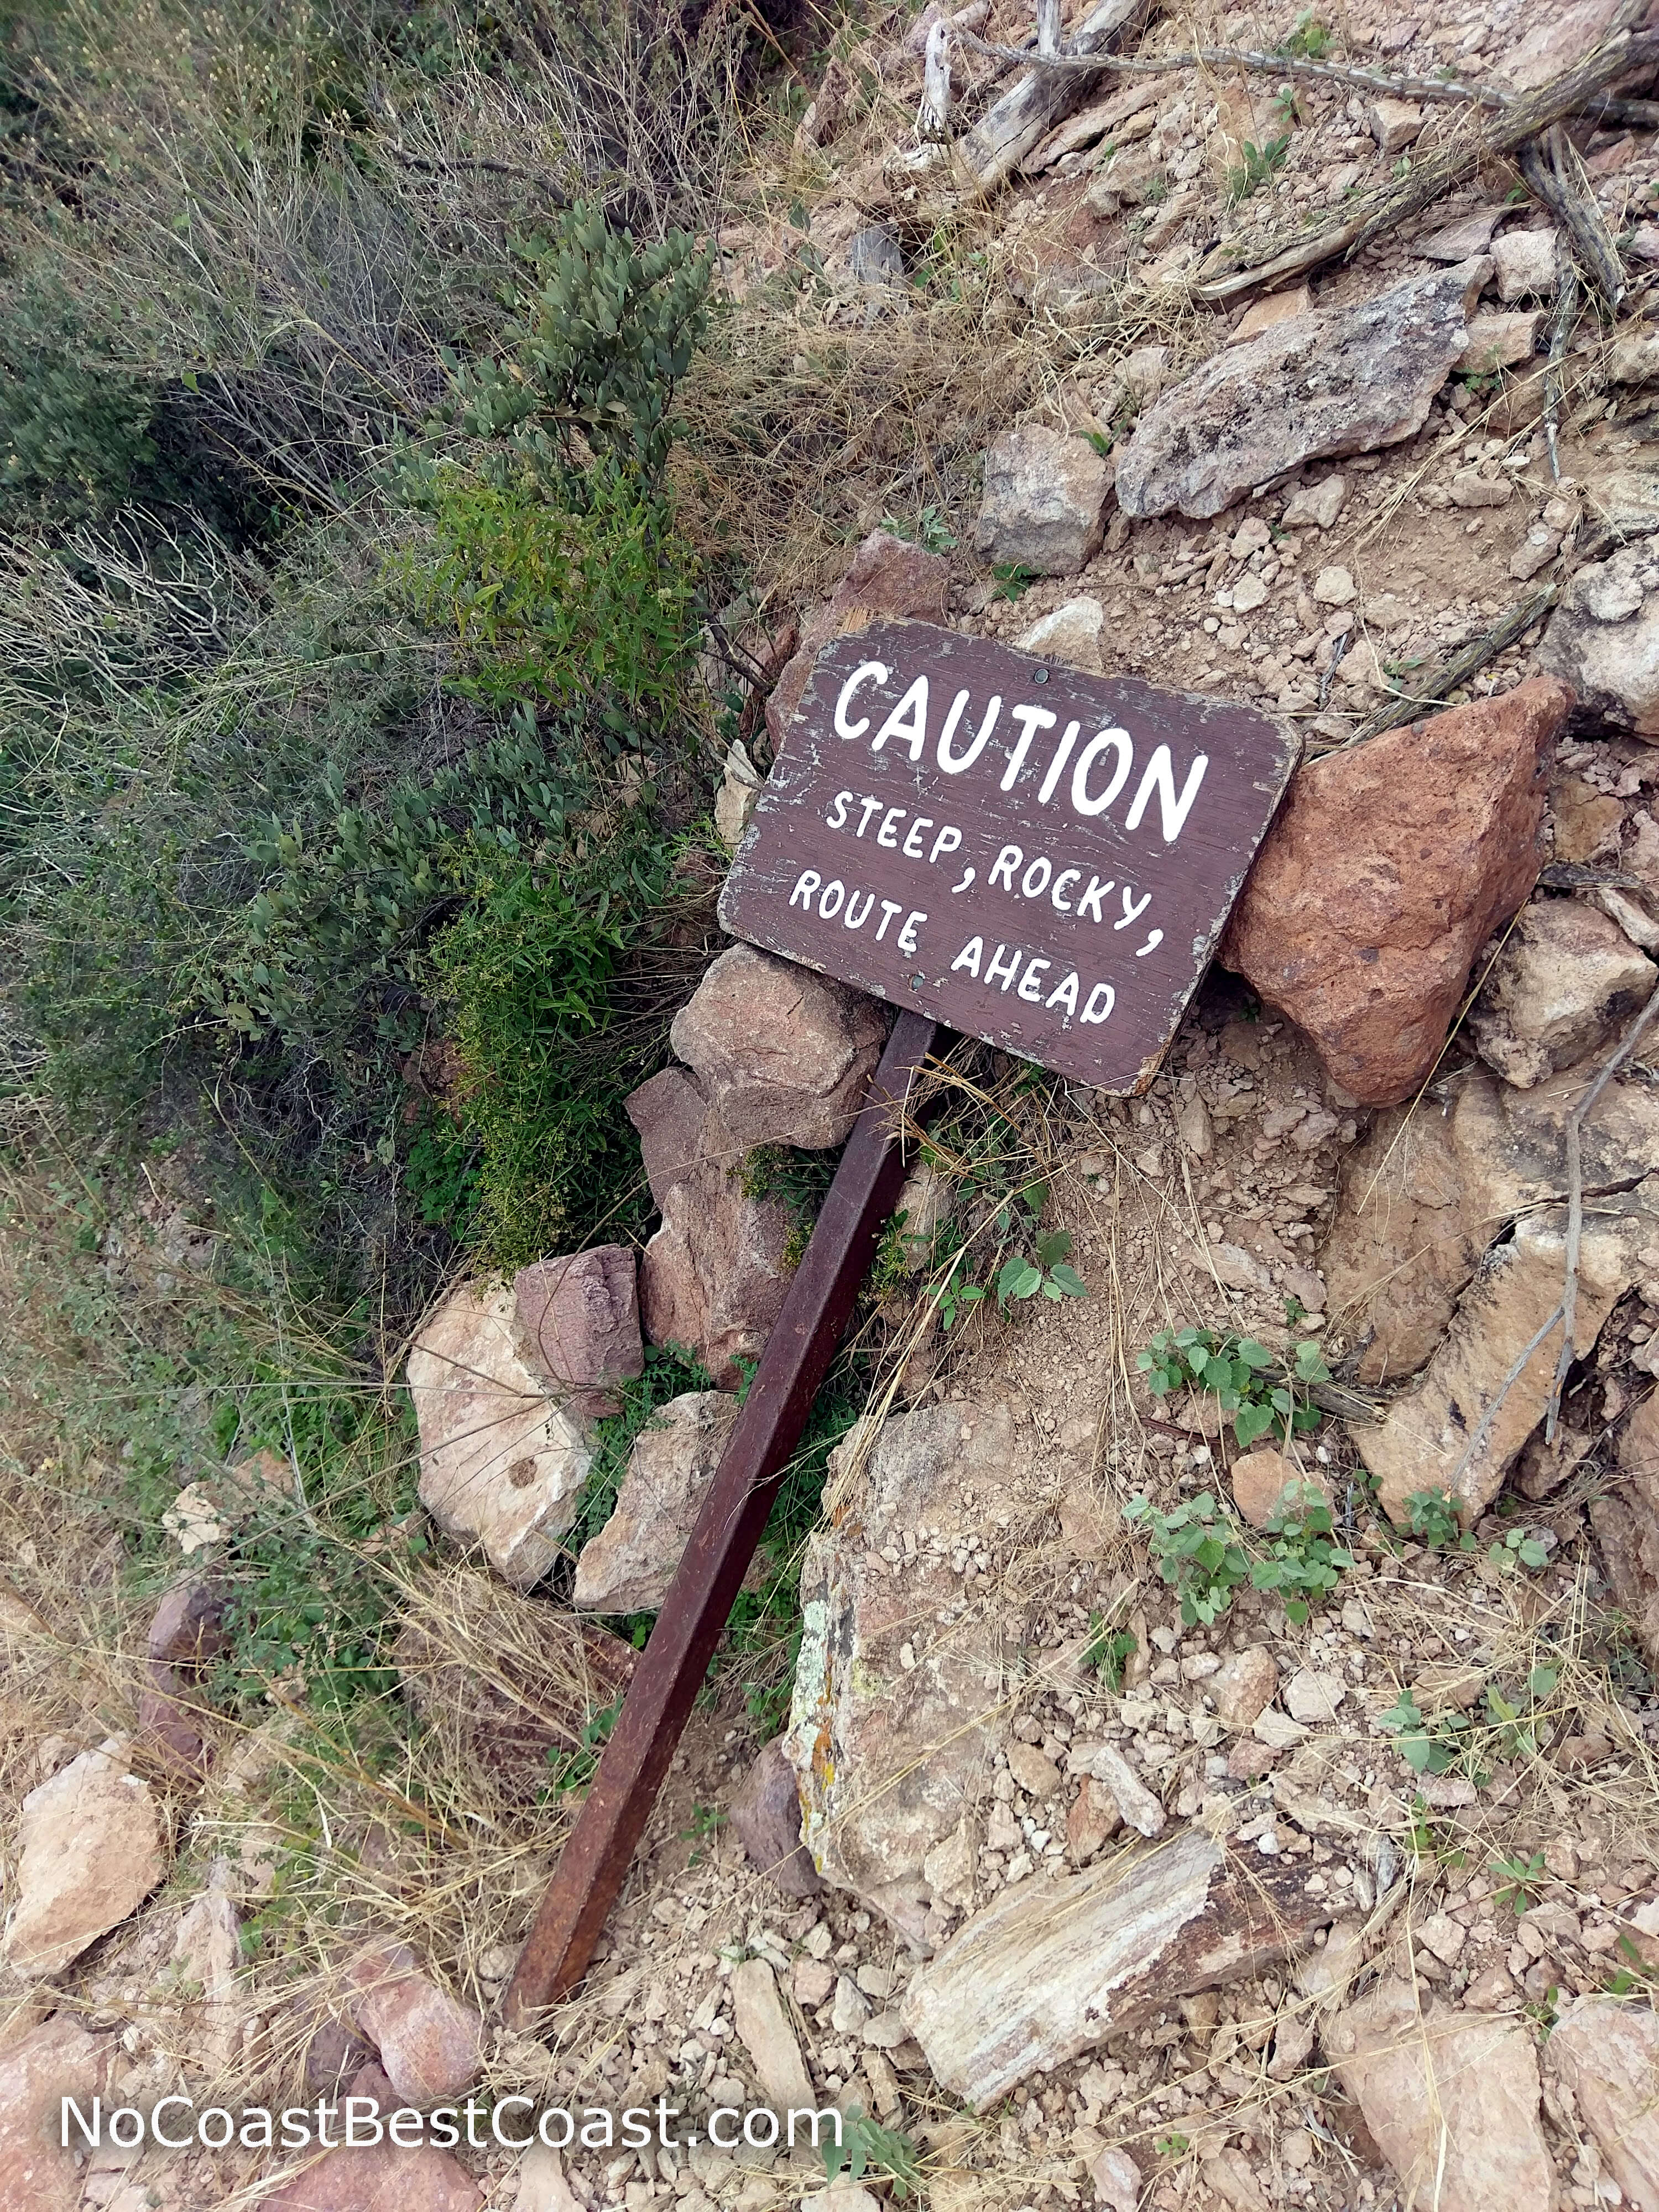 The downed trail sign warns of the dangerous route ahead